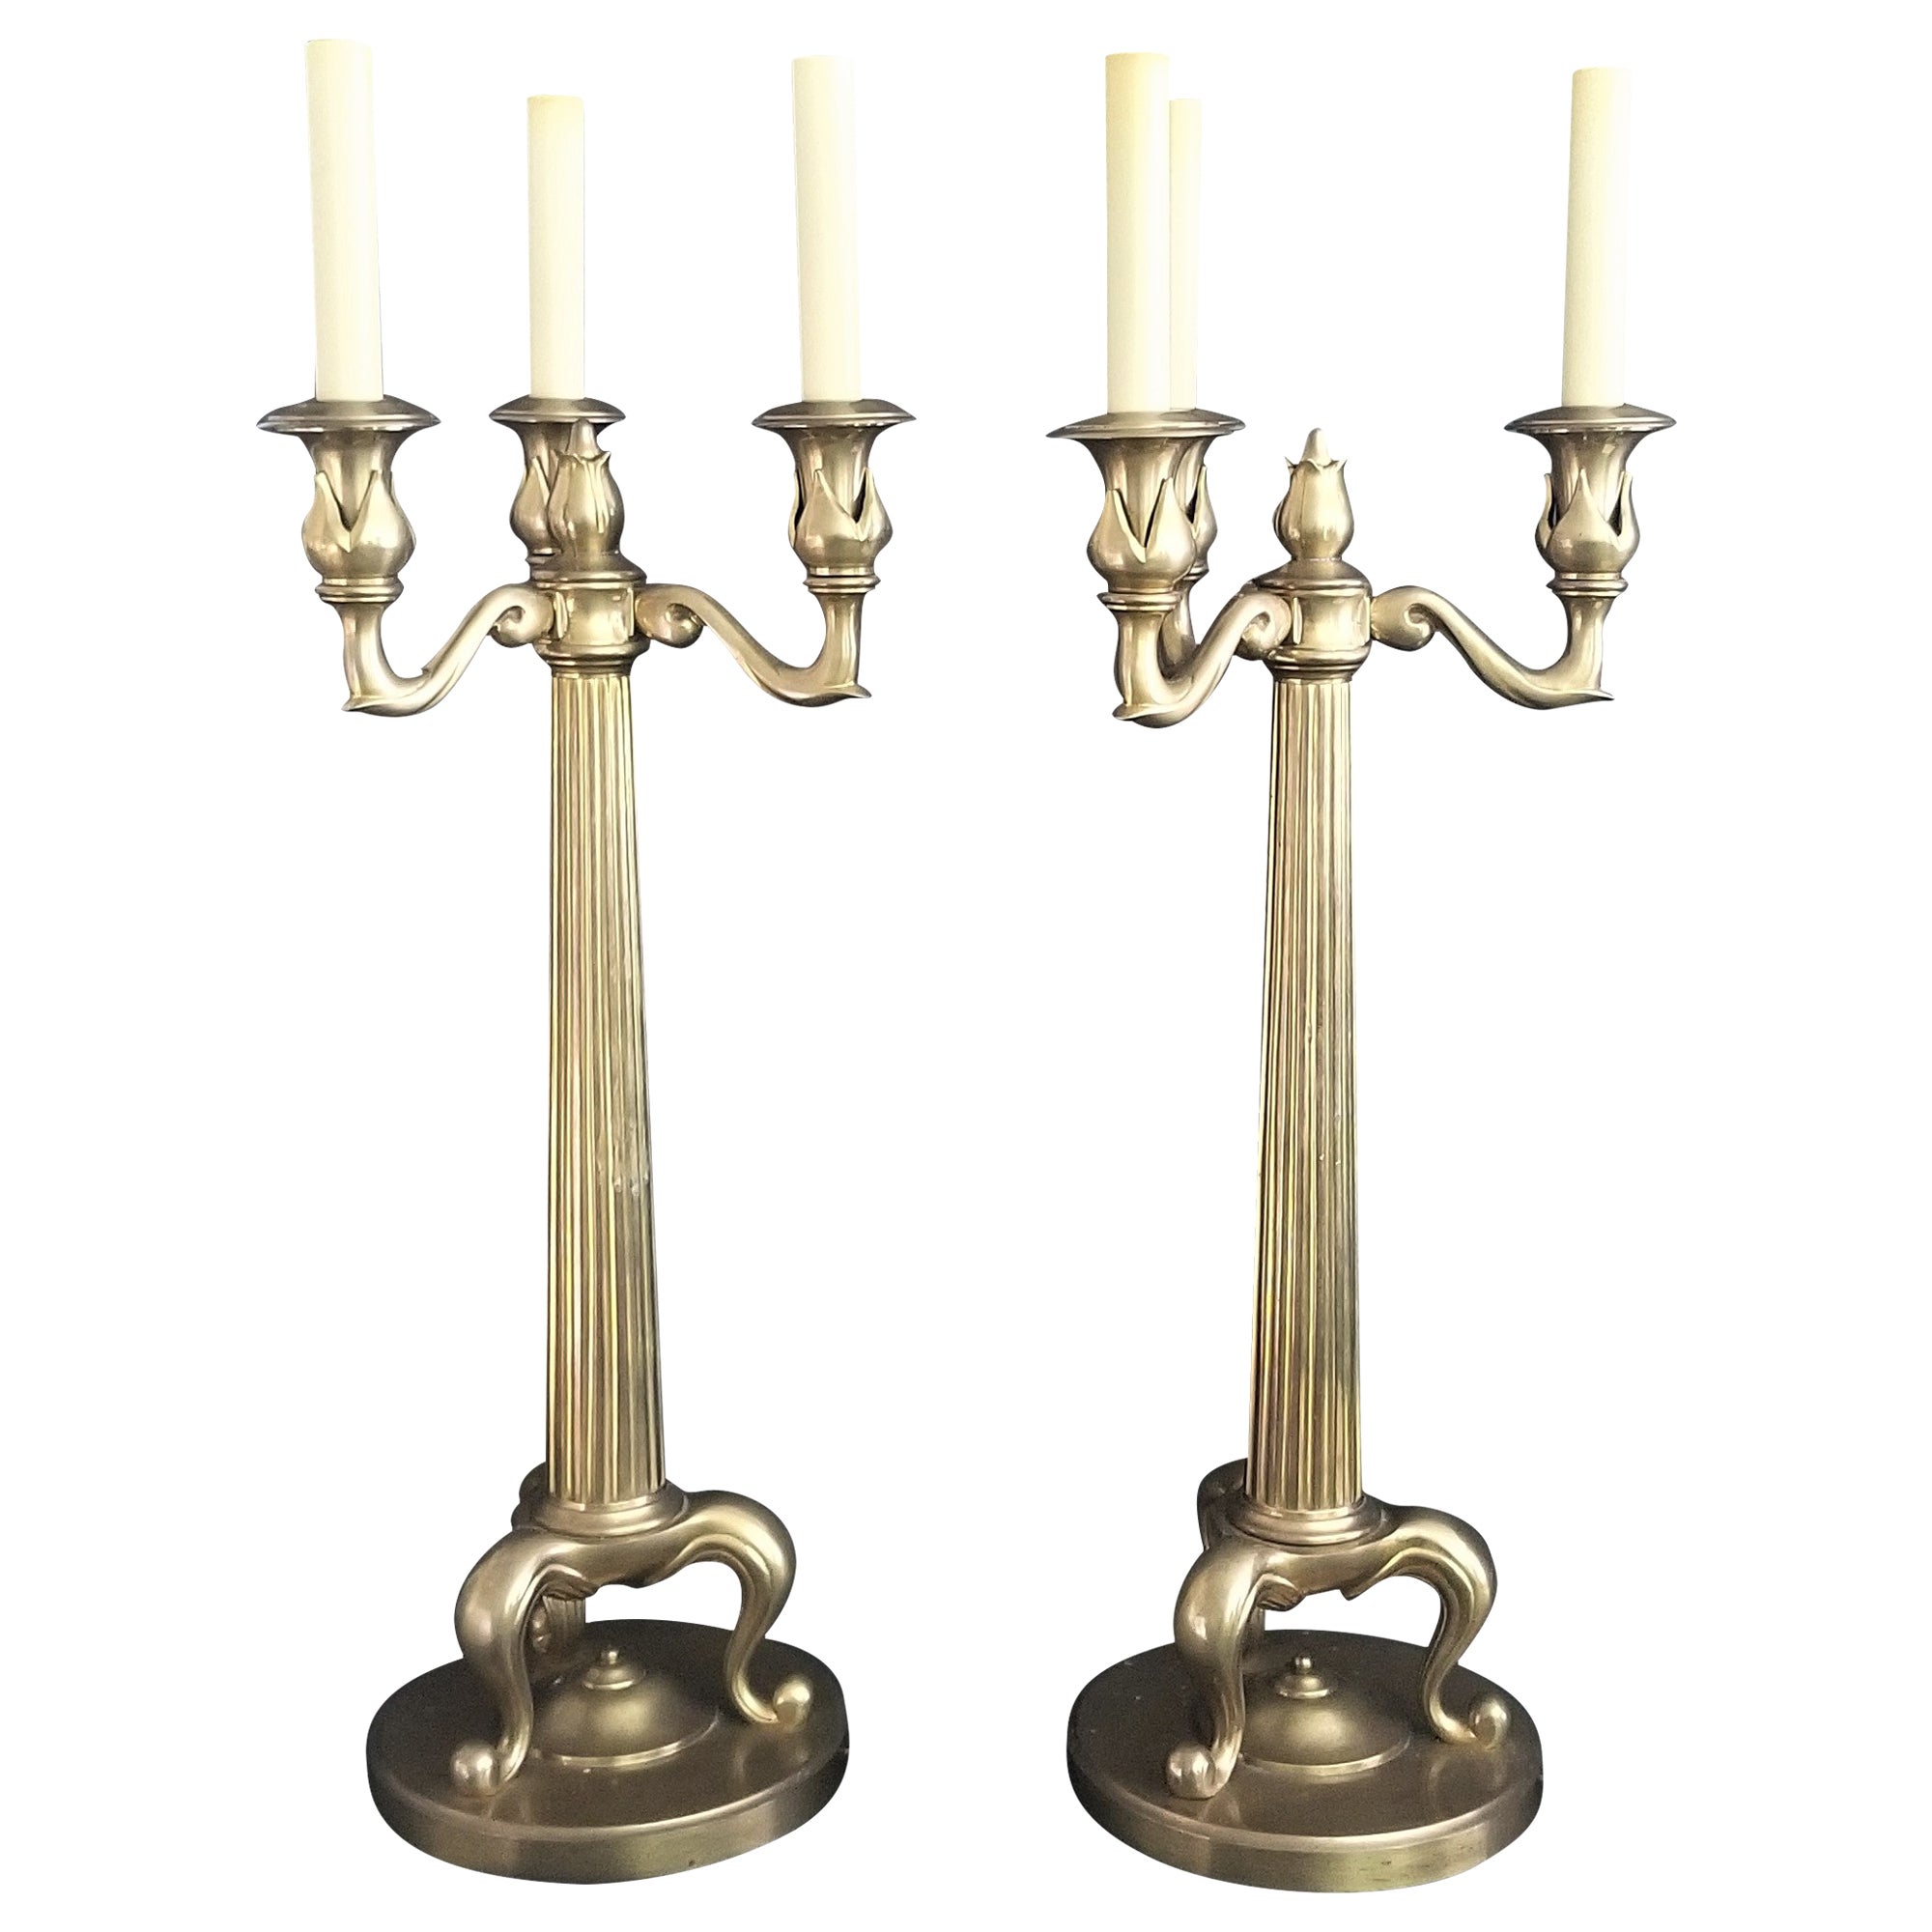 Chapman Heavy Brass Candelabra Fluted Column Table Lamps